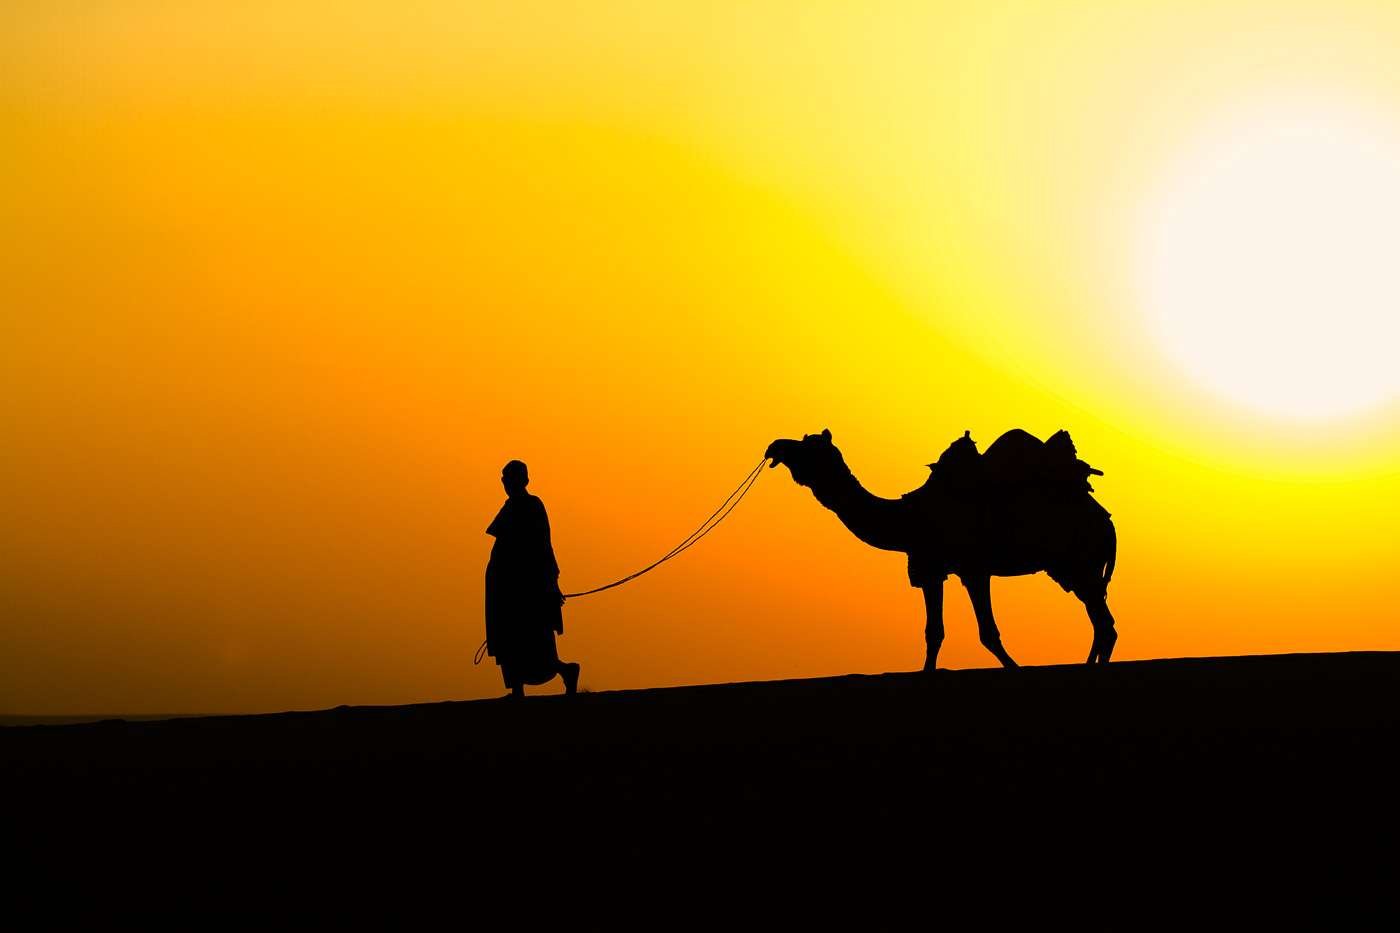 A camel-driver heads home over a dune at sunset at the Pushkar Camel Fair, Rajasthan.